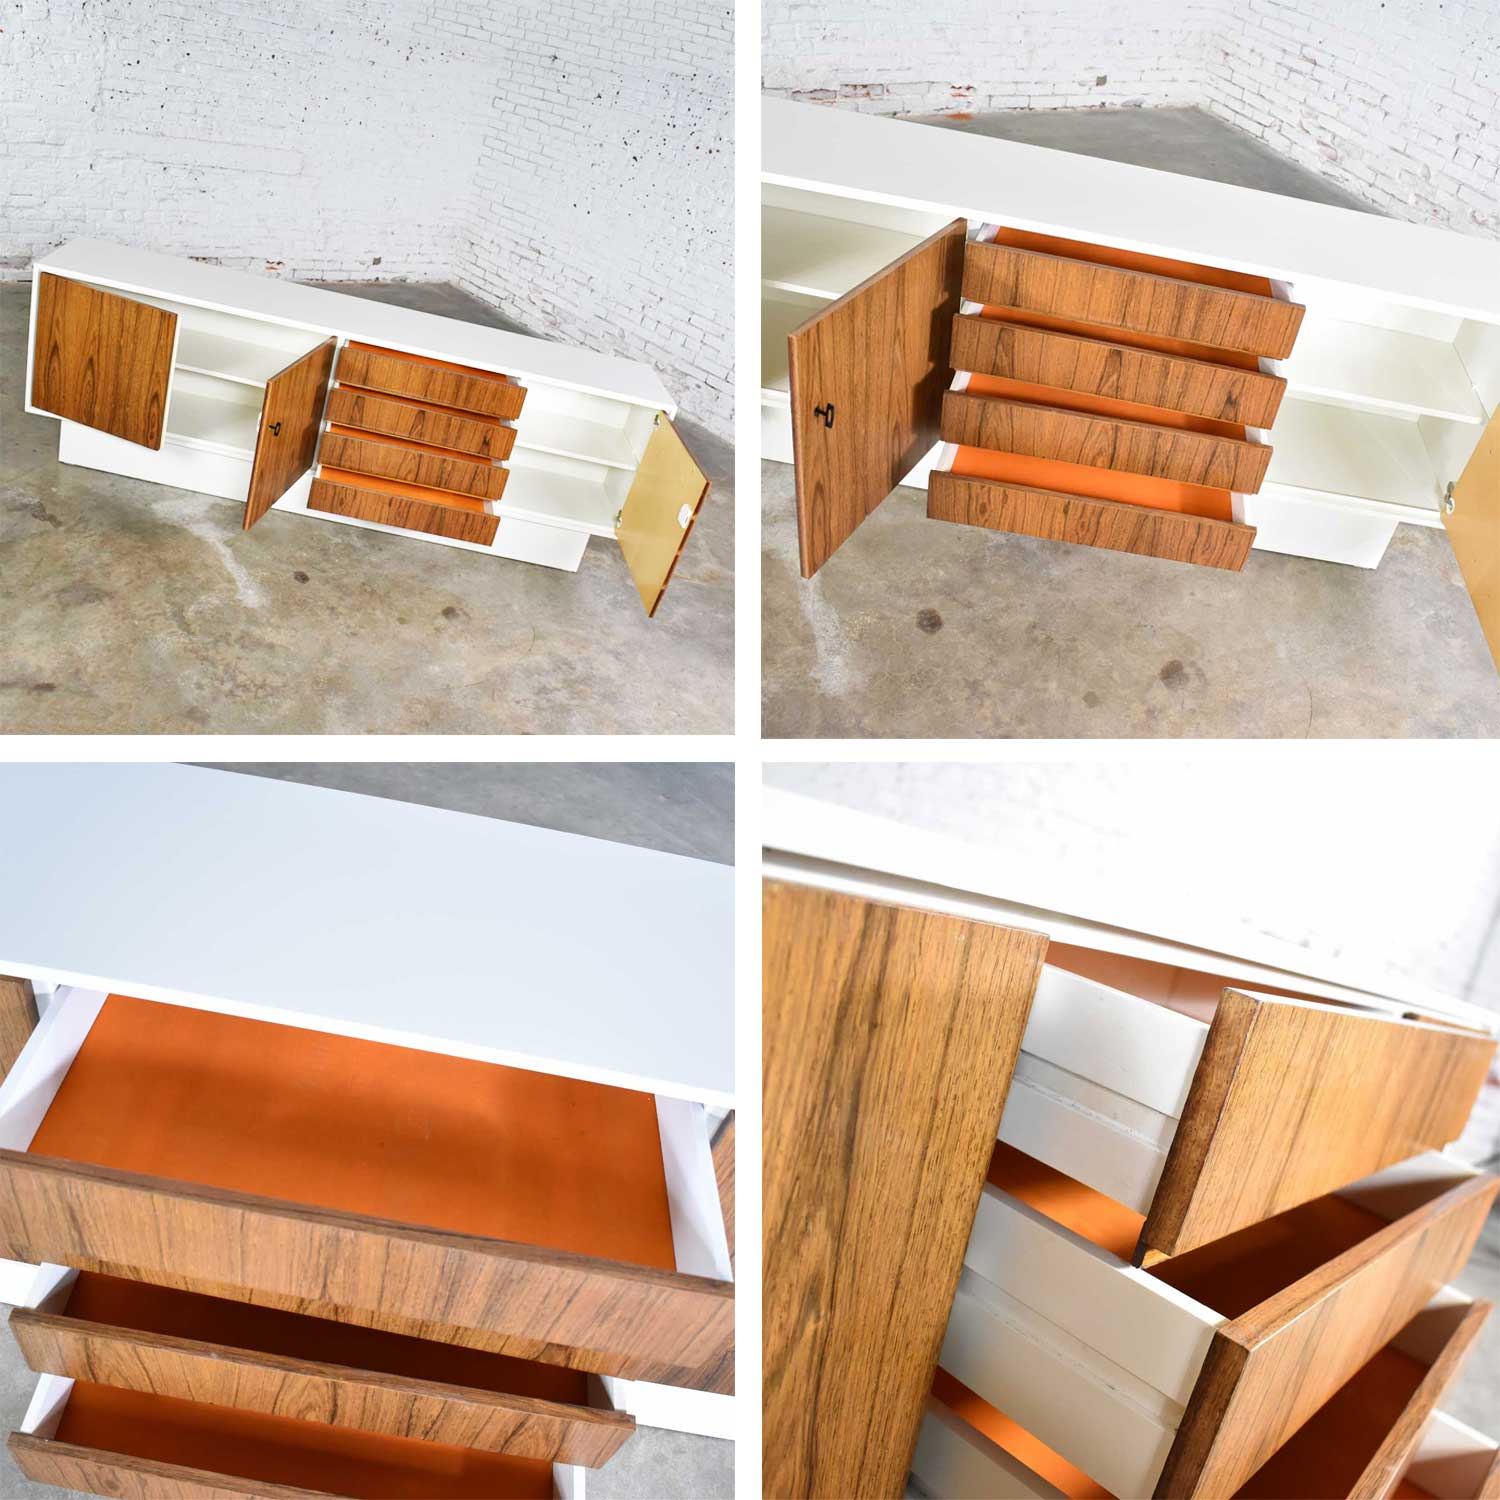 Mid Century Modern Scandinavian Style Credenza Buffet Two Toned w/ White Case & Teak Front